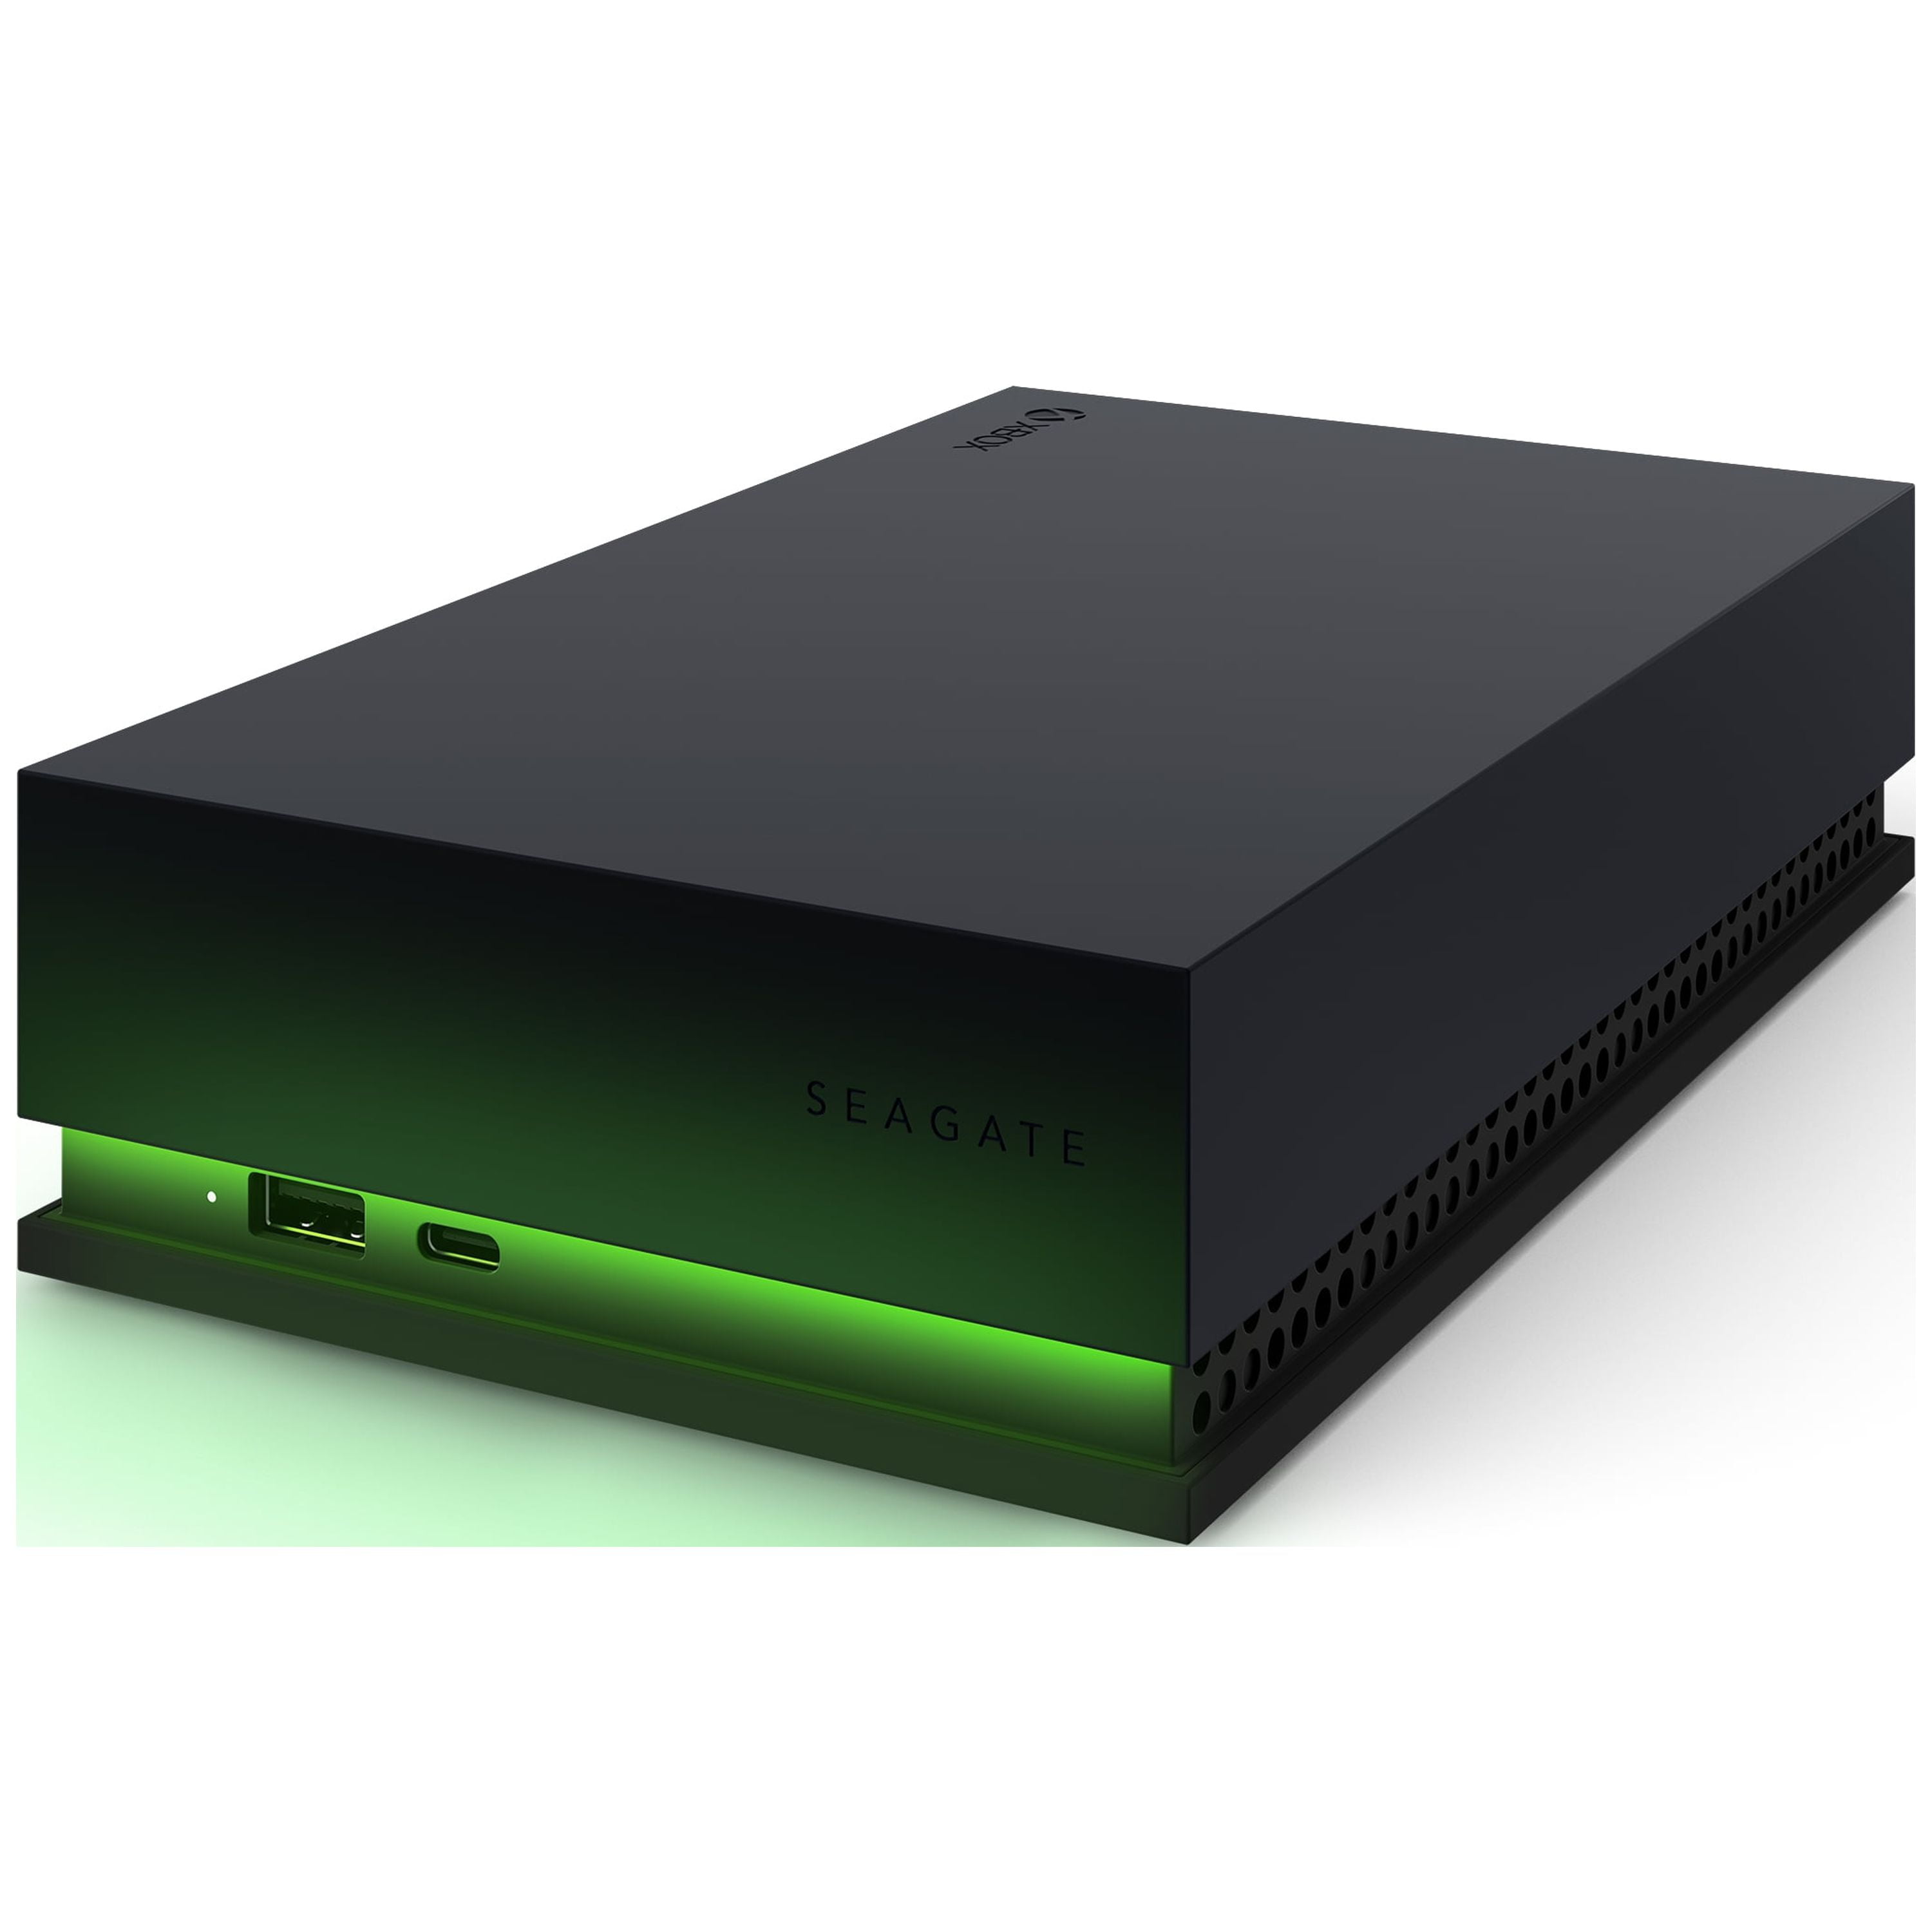 Game Drive for Xbox: External Hard Drives for Xbox